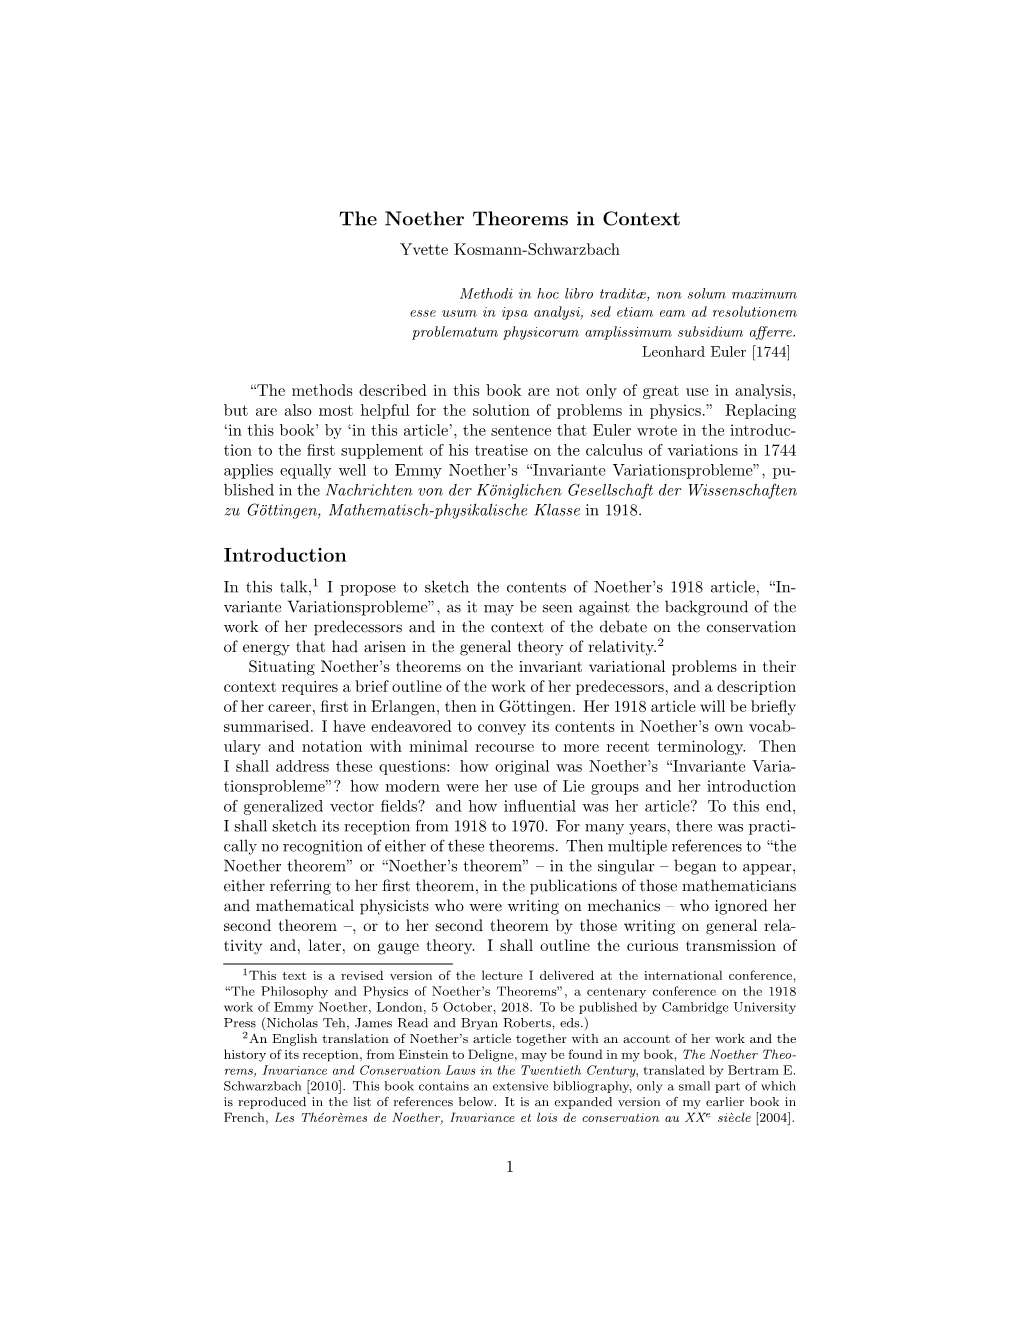 The Noether Theorems in Context Introduction